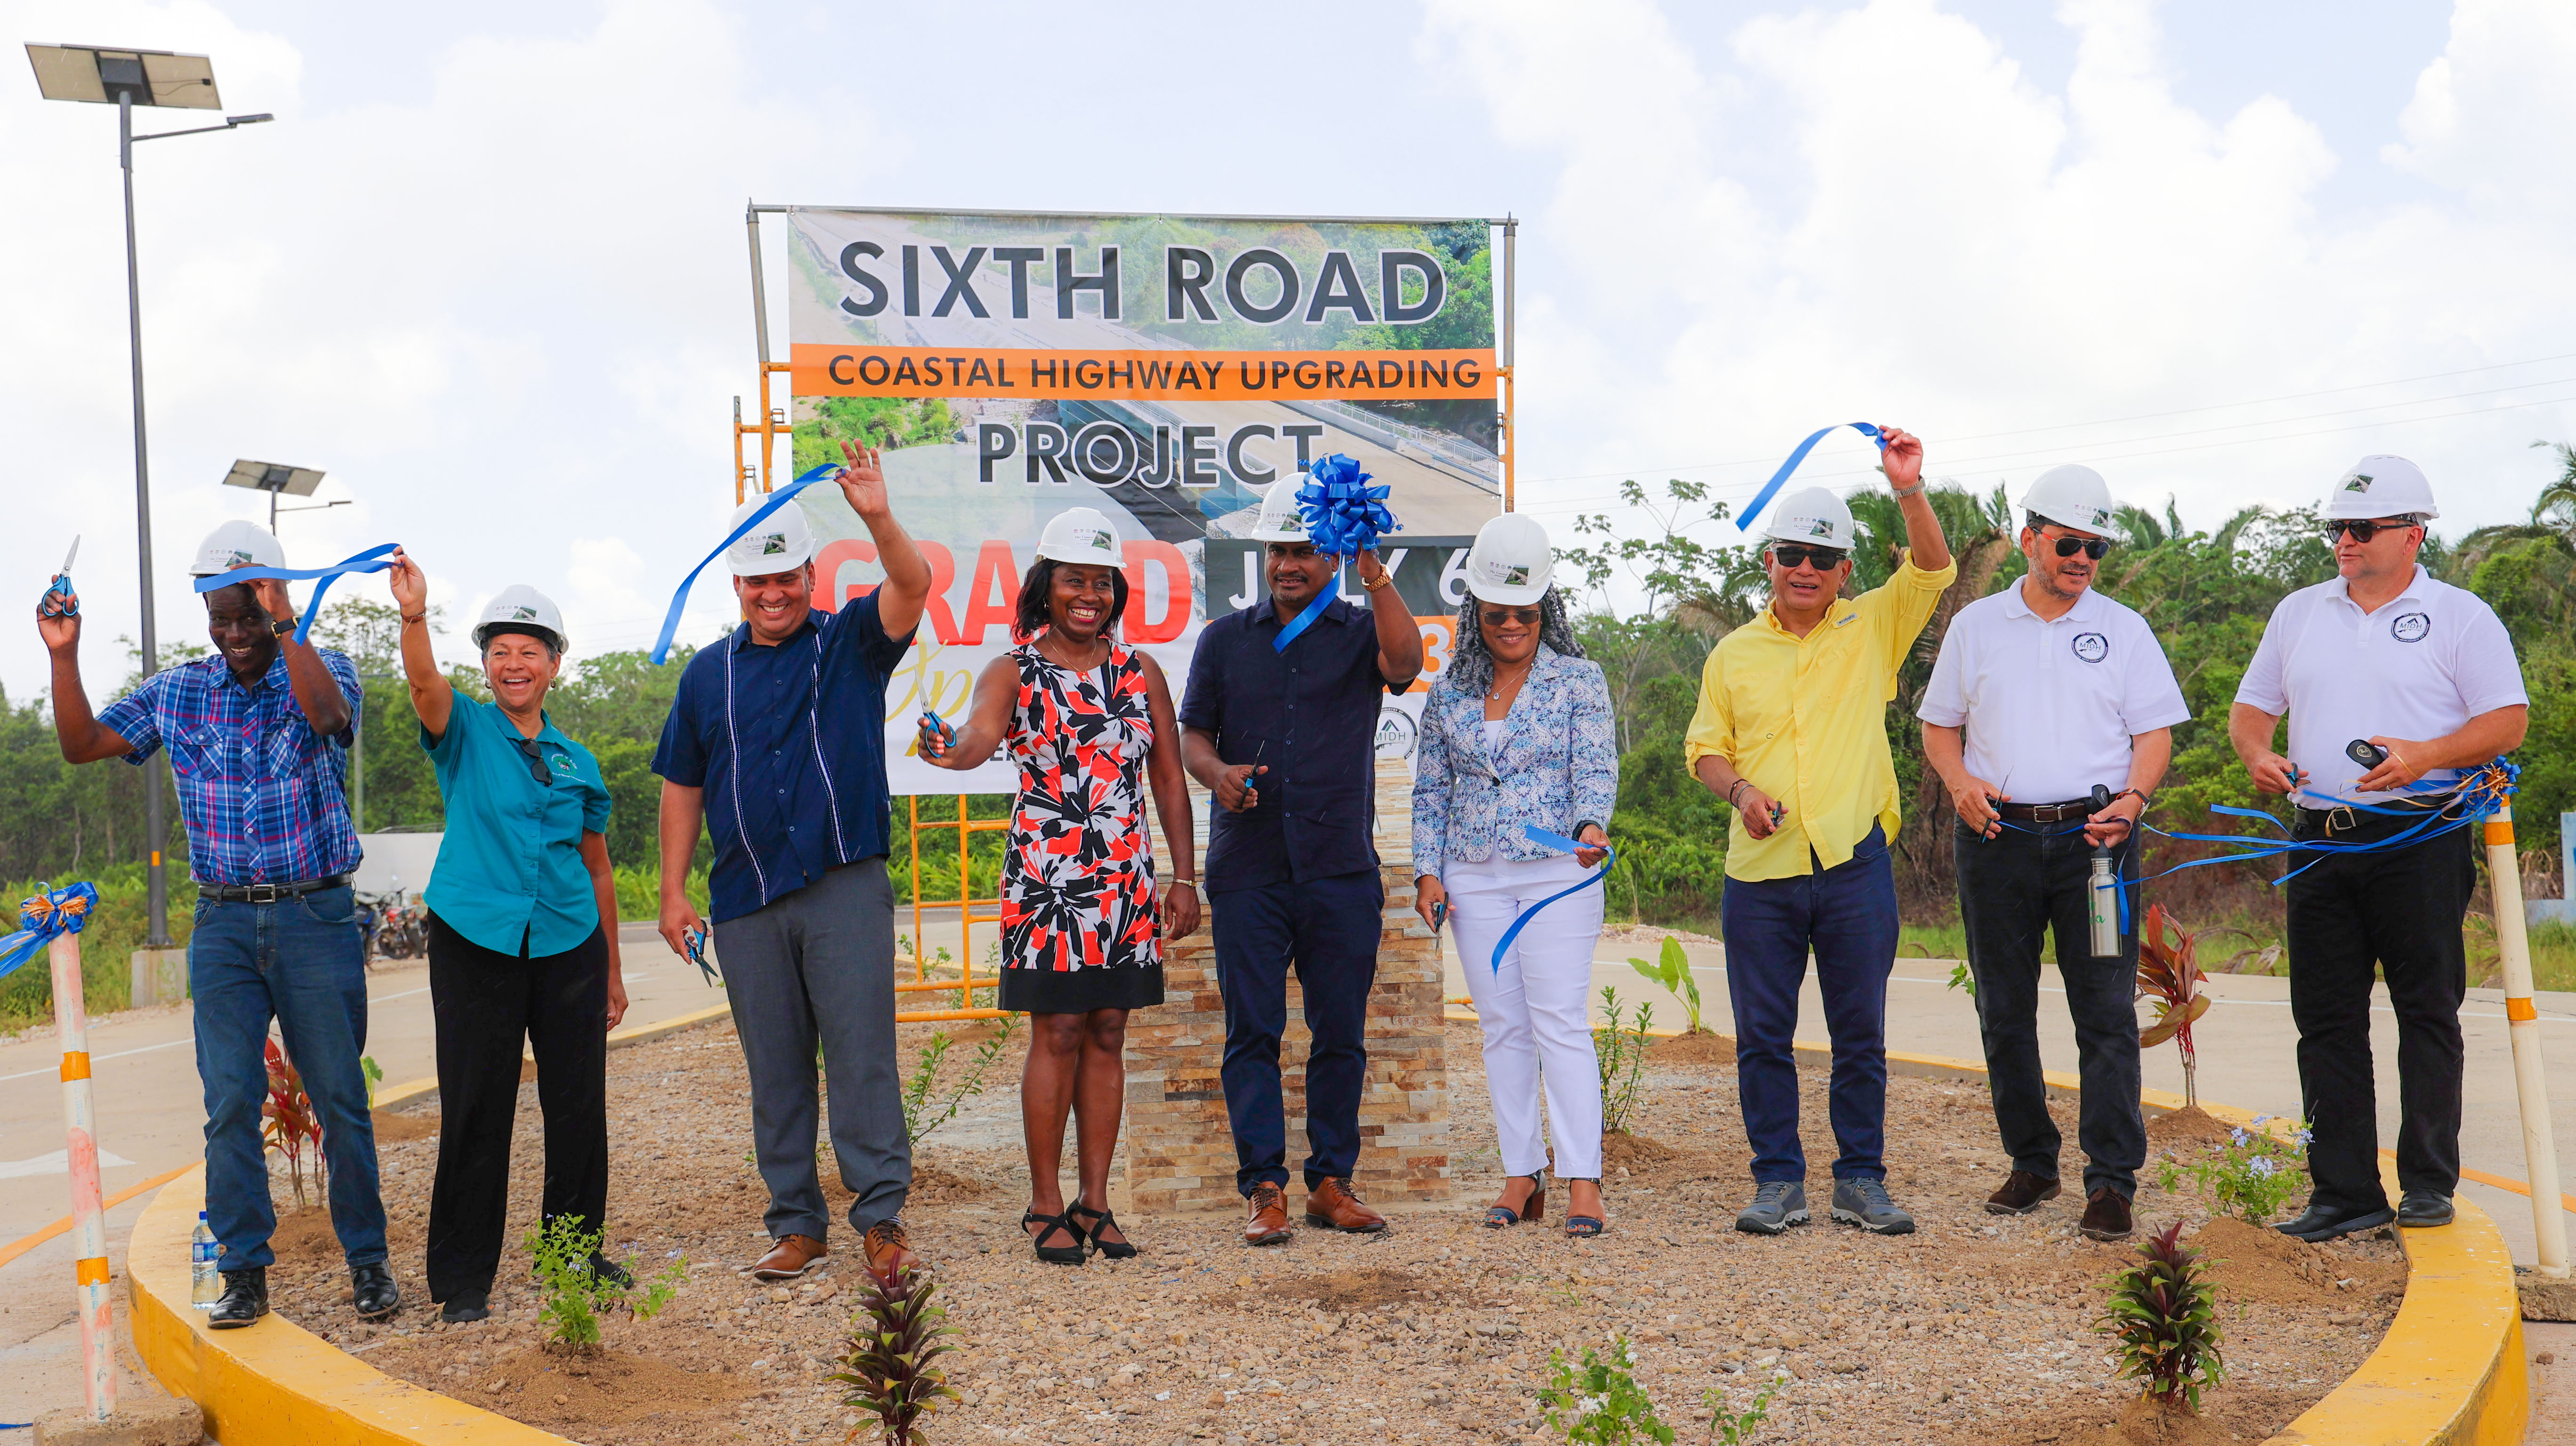 group photo of stakeholders standing on upgraded coastal highway